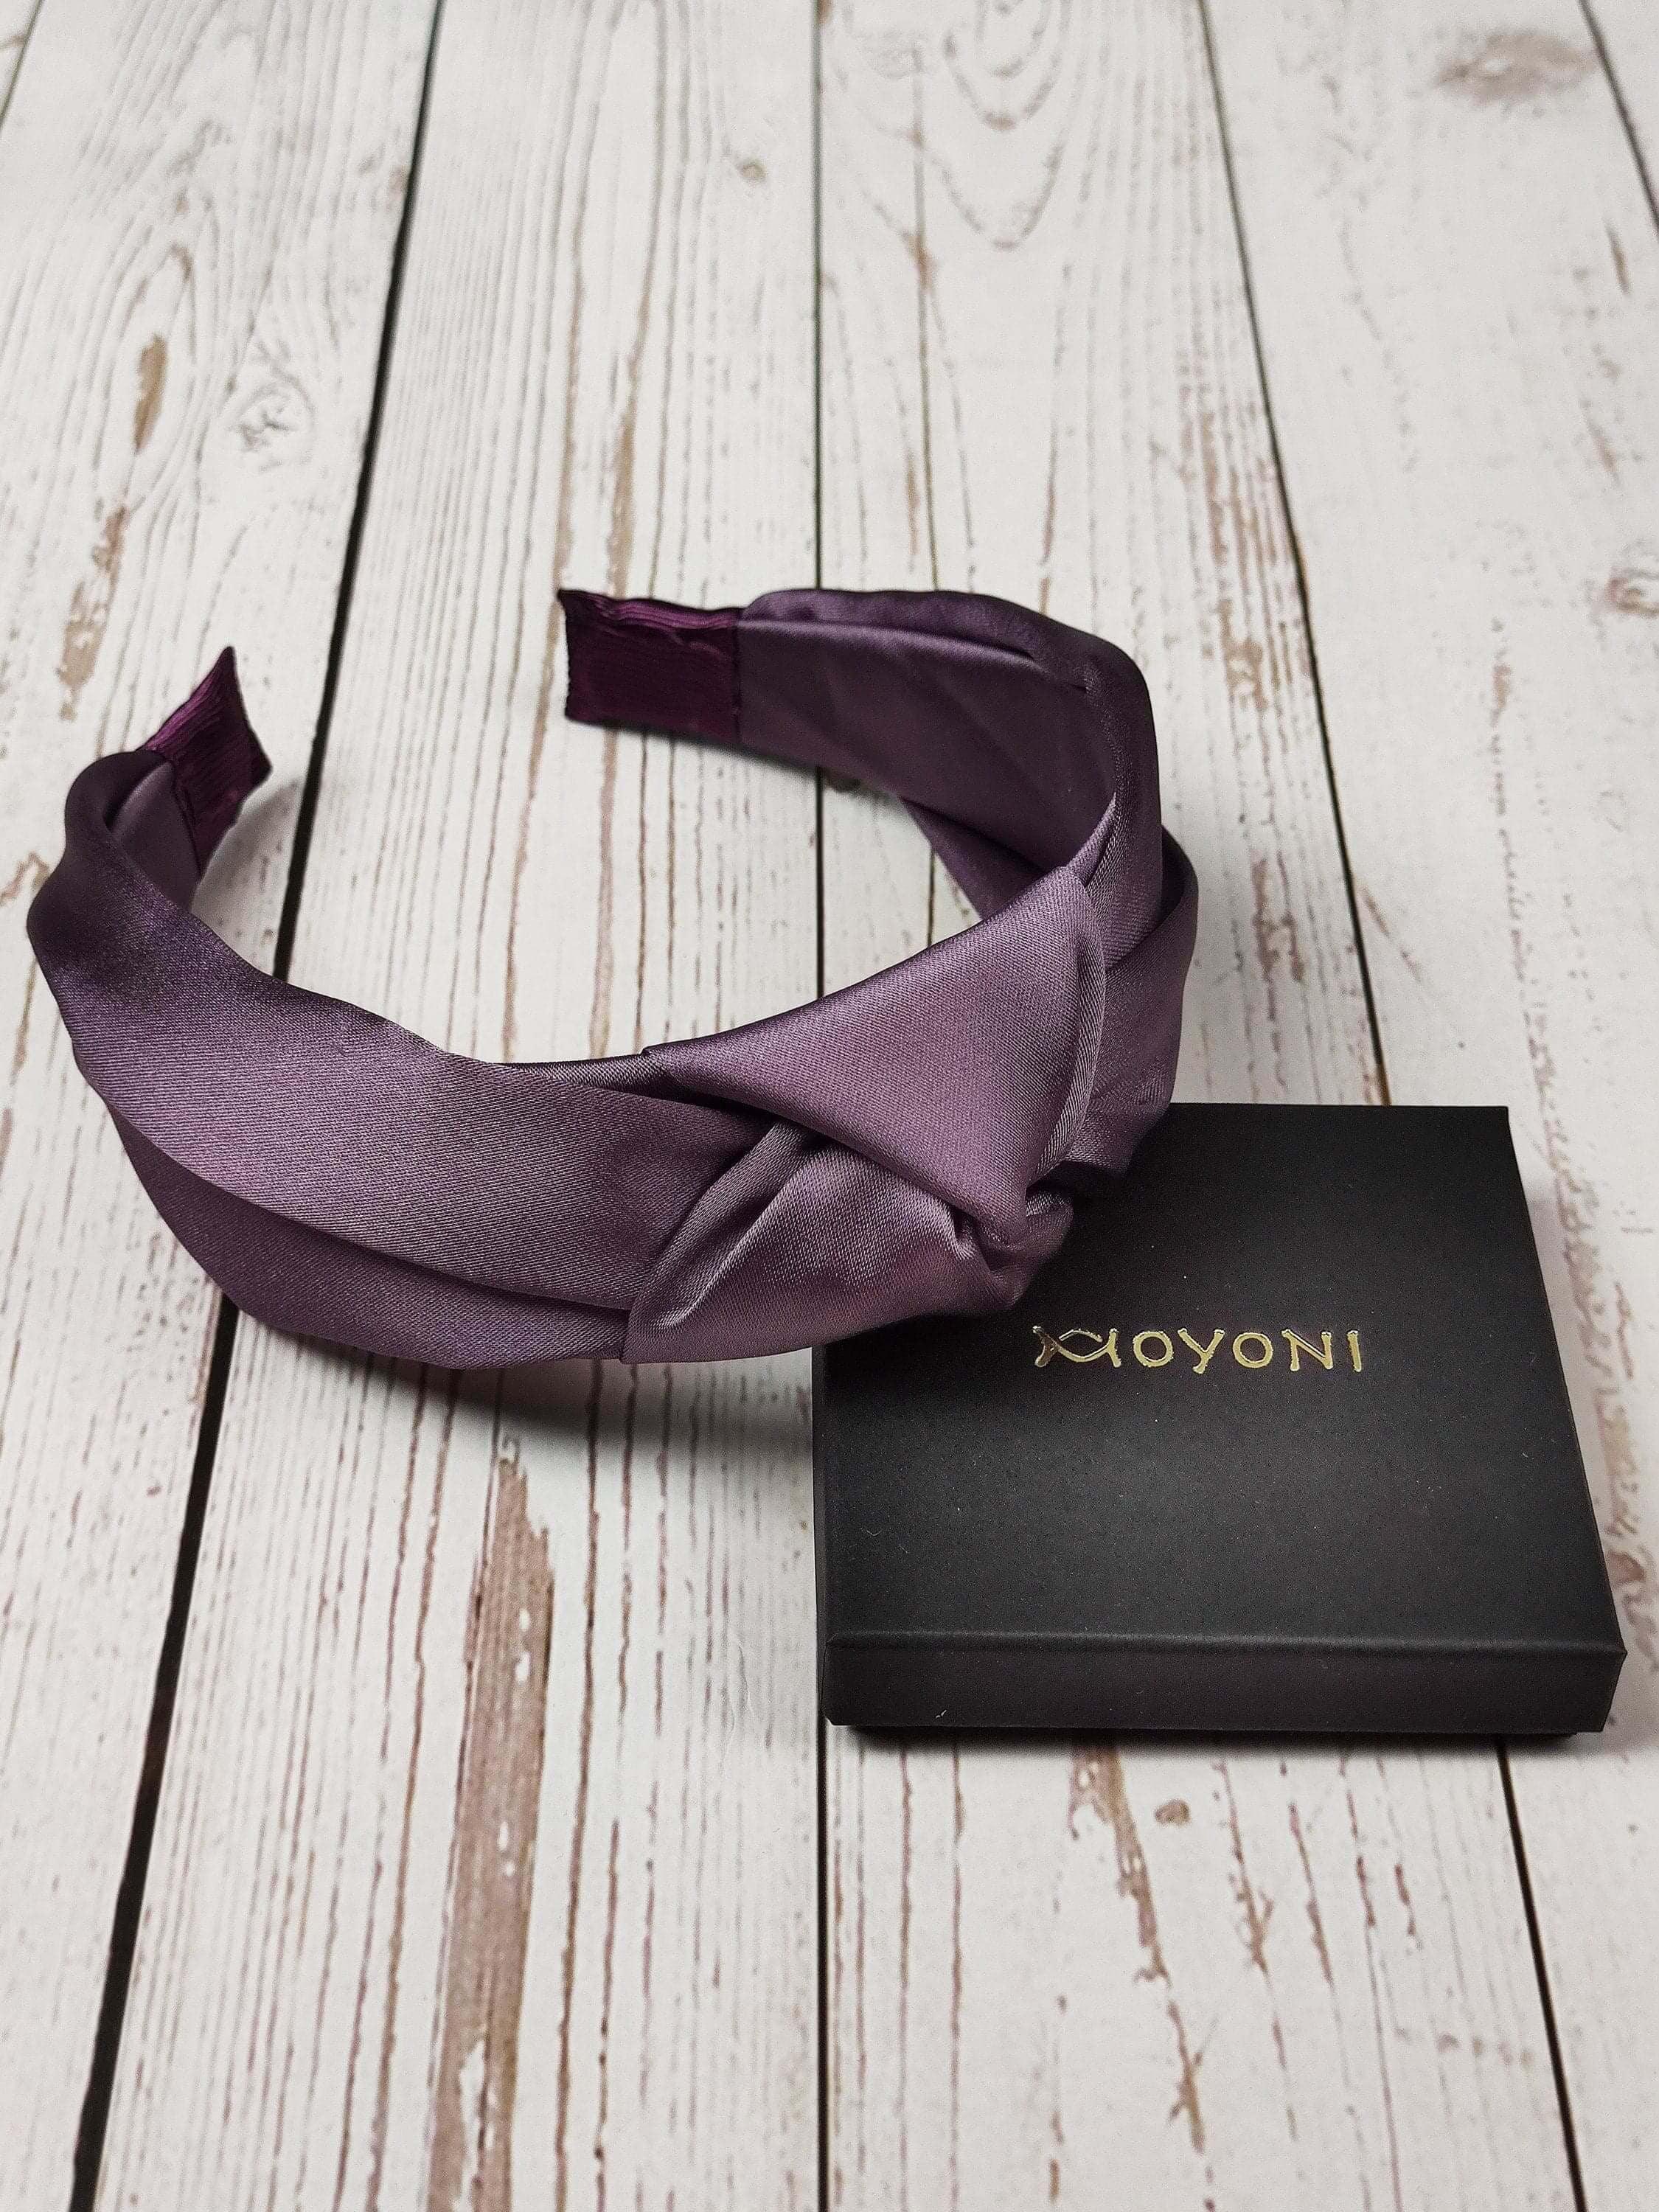 Handcrafted Lilac Satin Knotted Headband - Light Purple Women's Fashion Hair Accessory for Special Occasions available at Moyoni Design